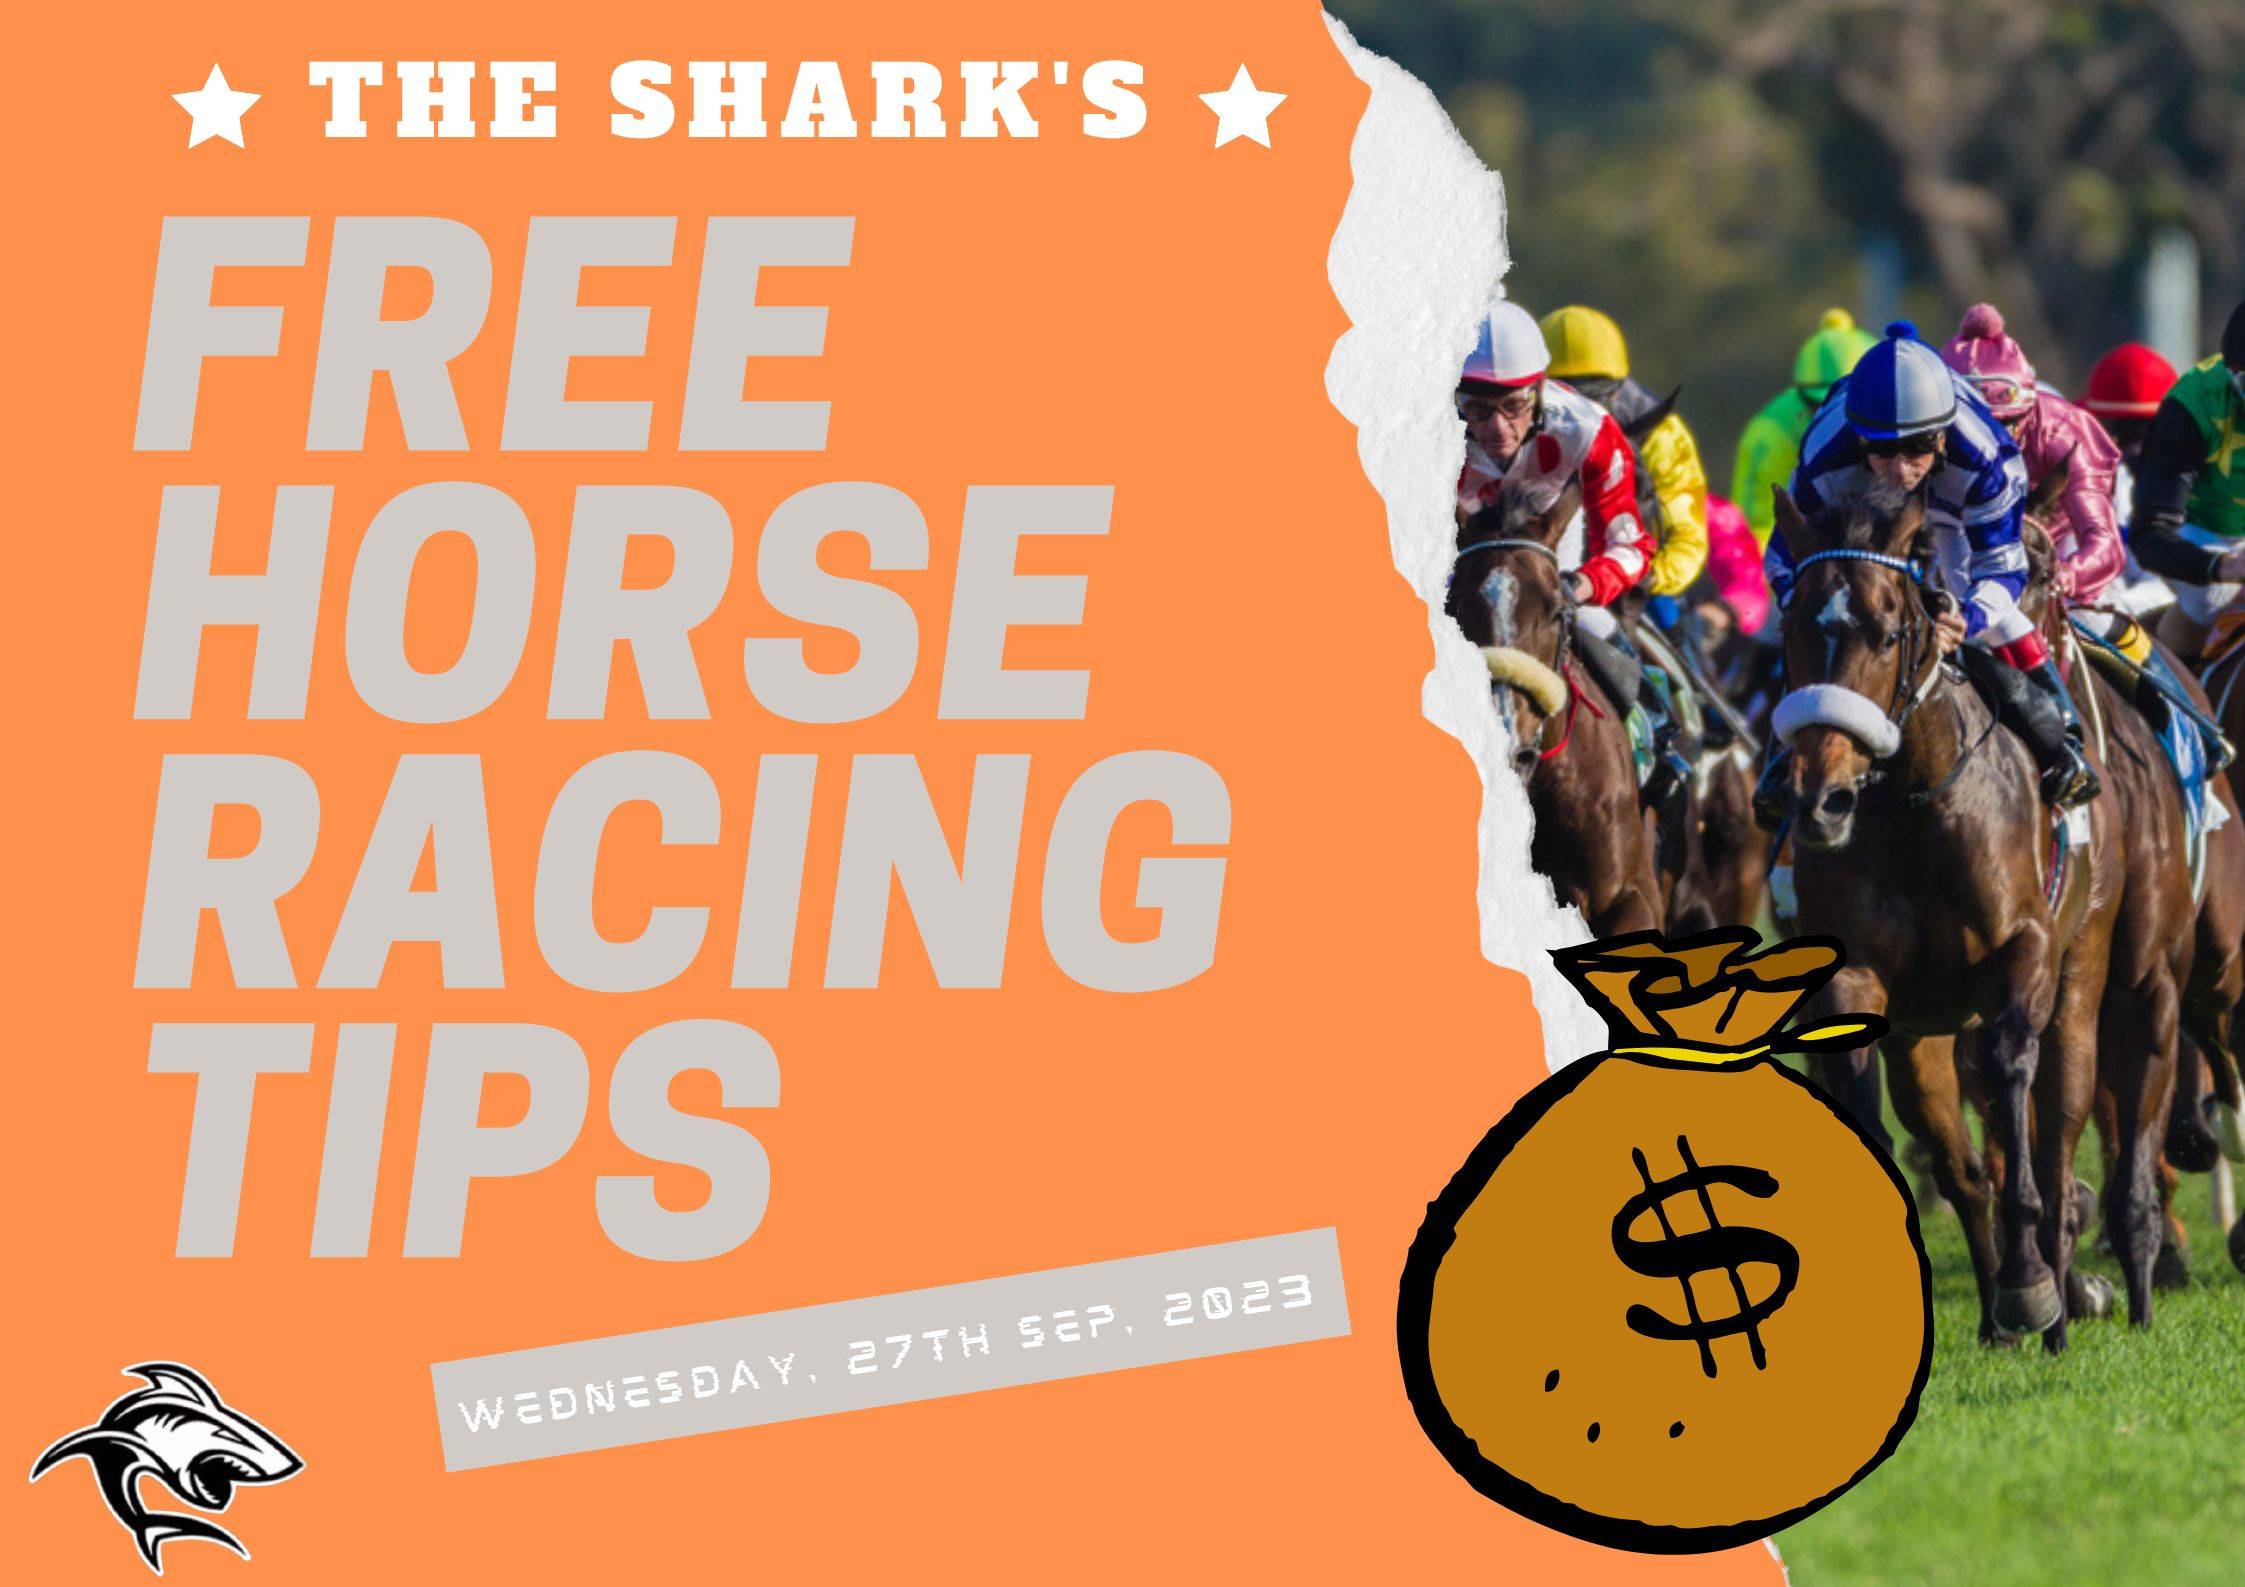 Free Horse Racing Tips - 27th Sep